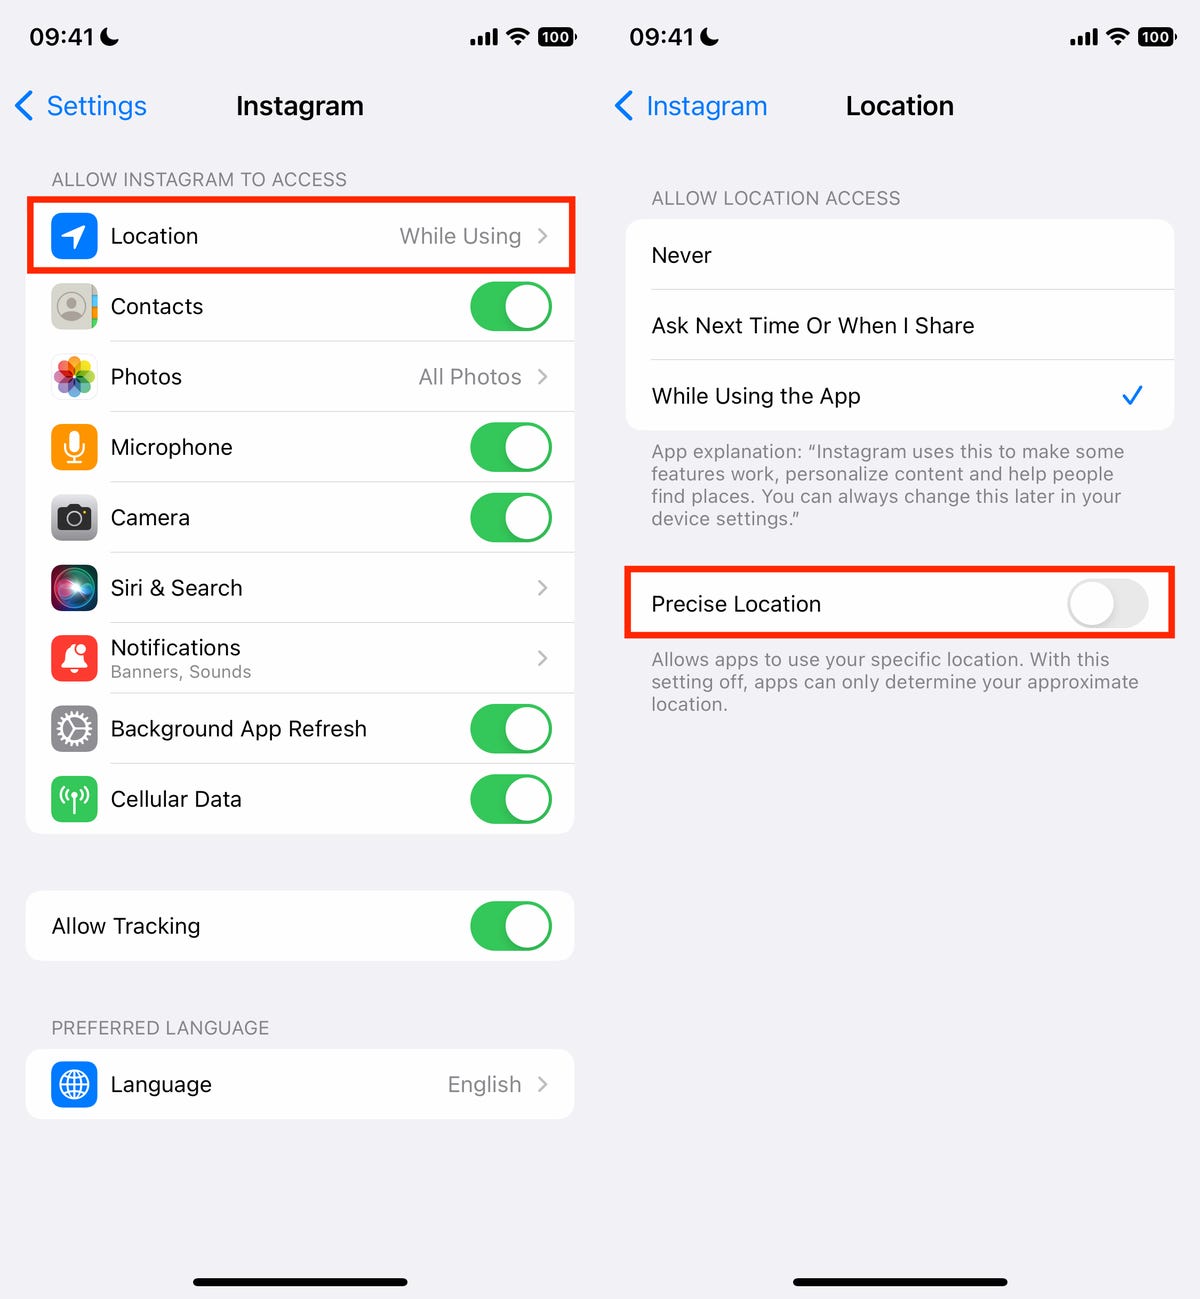 Why You May Want to Revoke Precise Location Permissions From Instagram
                        Don't worry: This iPhone feature doesn't provide your exact location to others on social media.